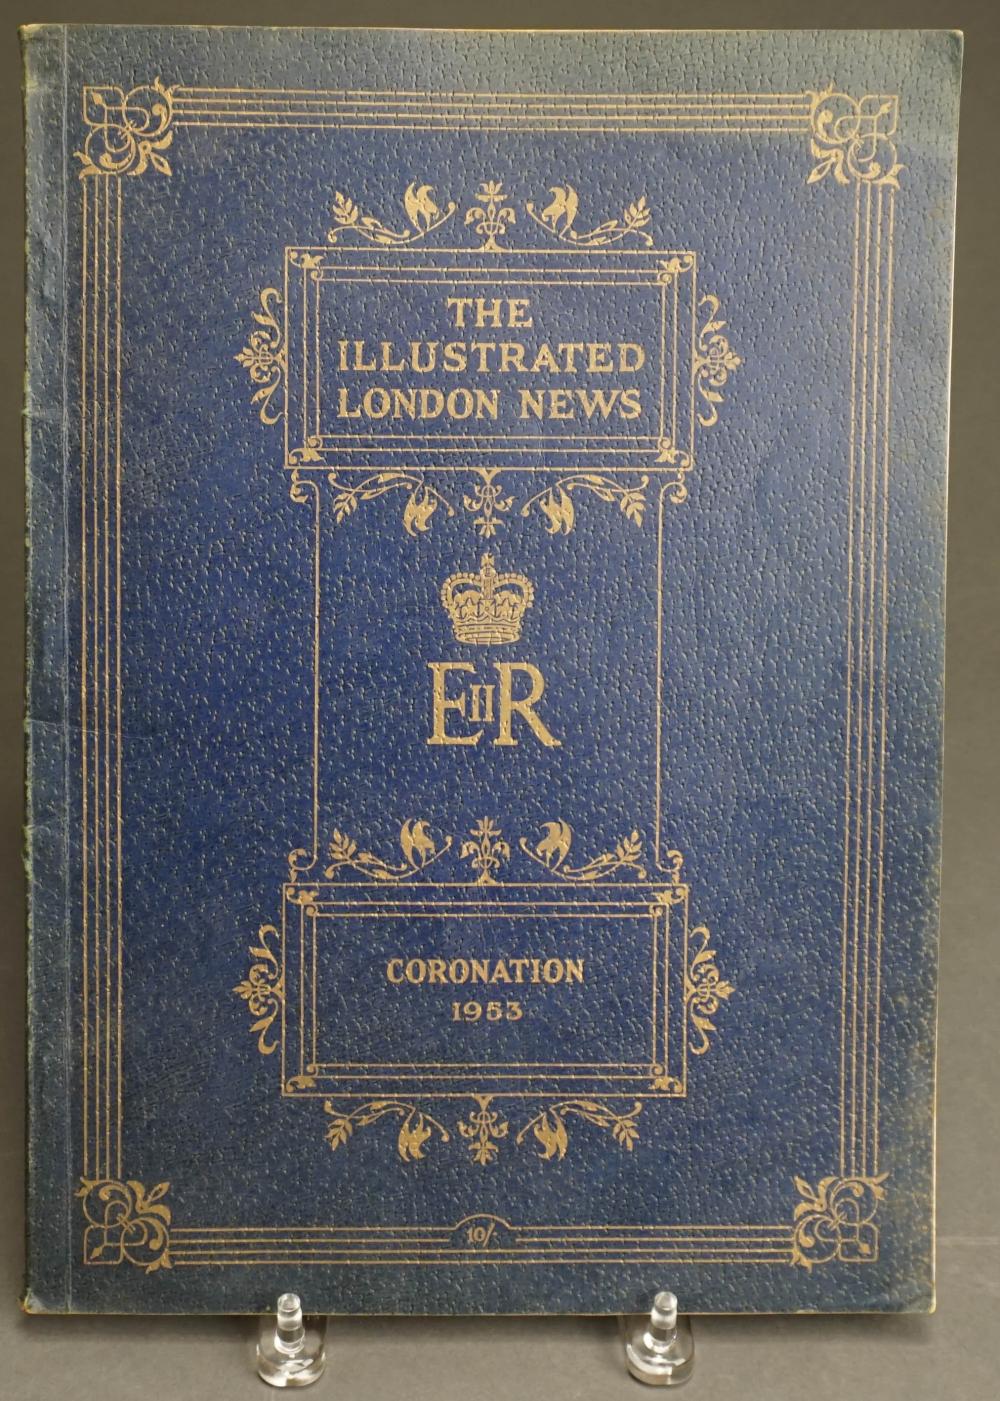 THE ILLUSTRATED LONDON NEWS QUEEN 330e0a